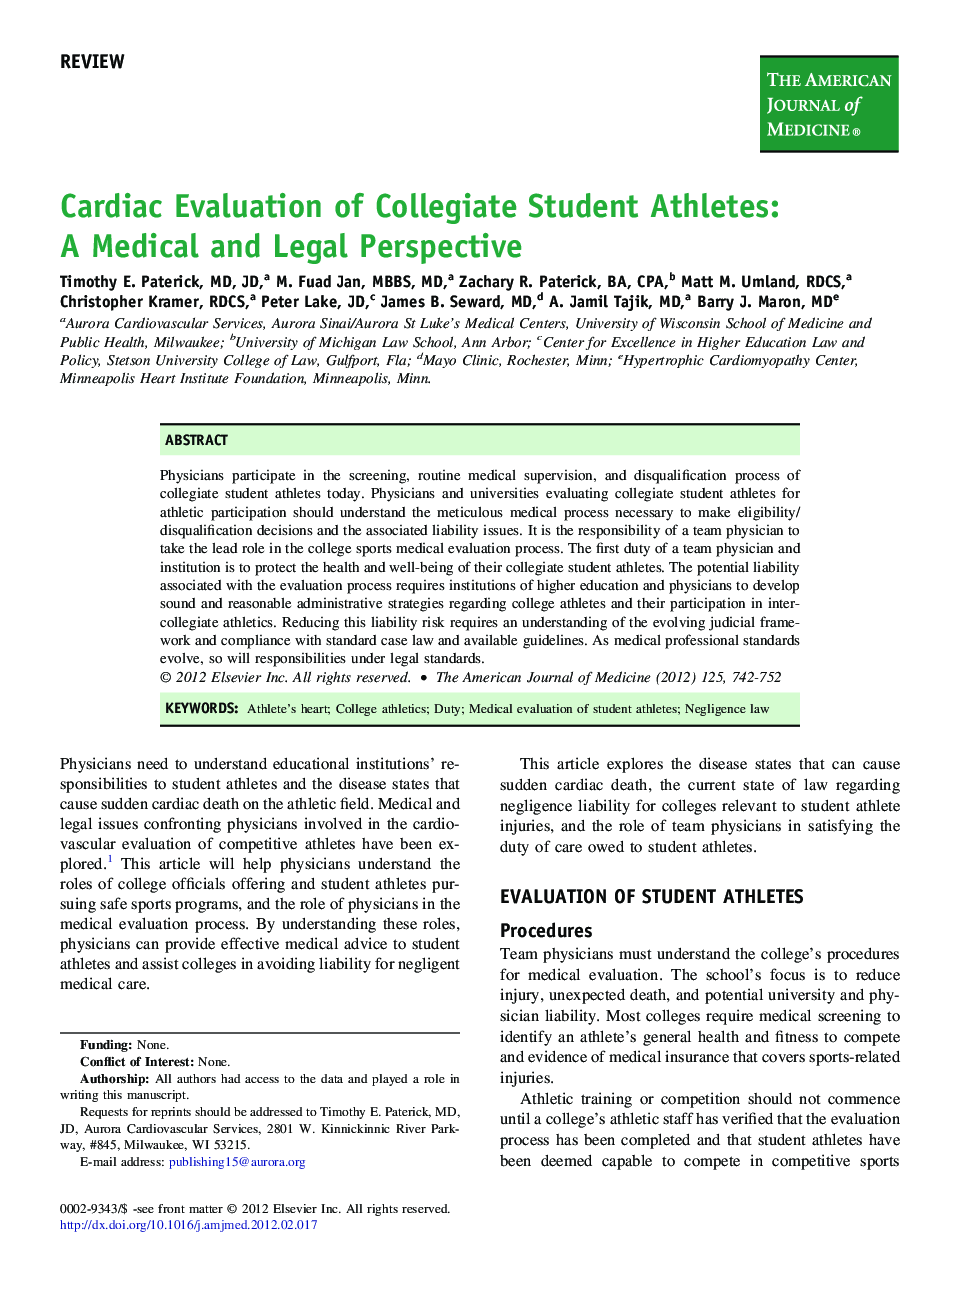 Cardiac Evaluation of Collegiate Student Athletes: A Medical and Legal Perspective 